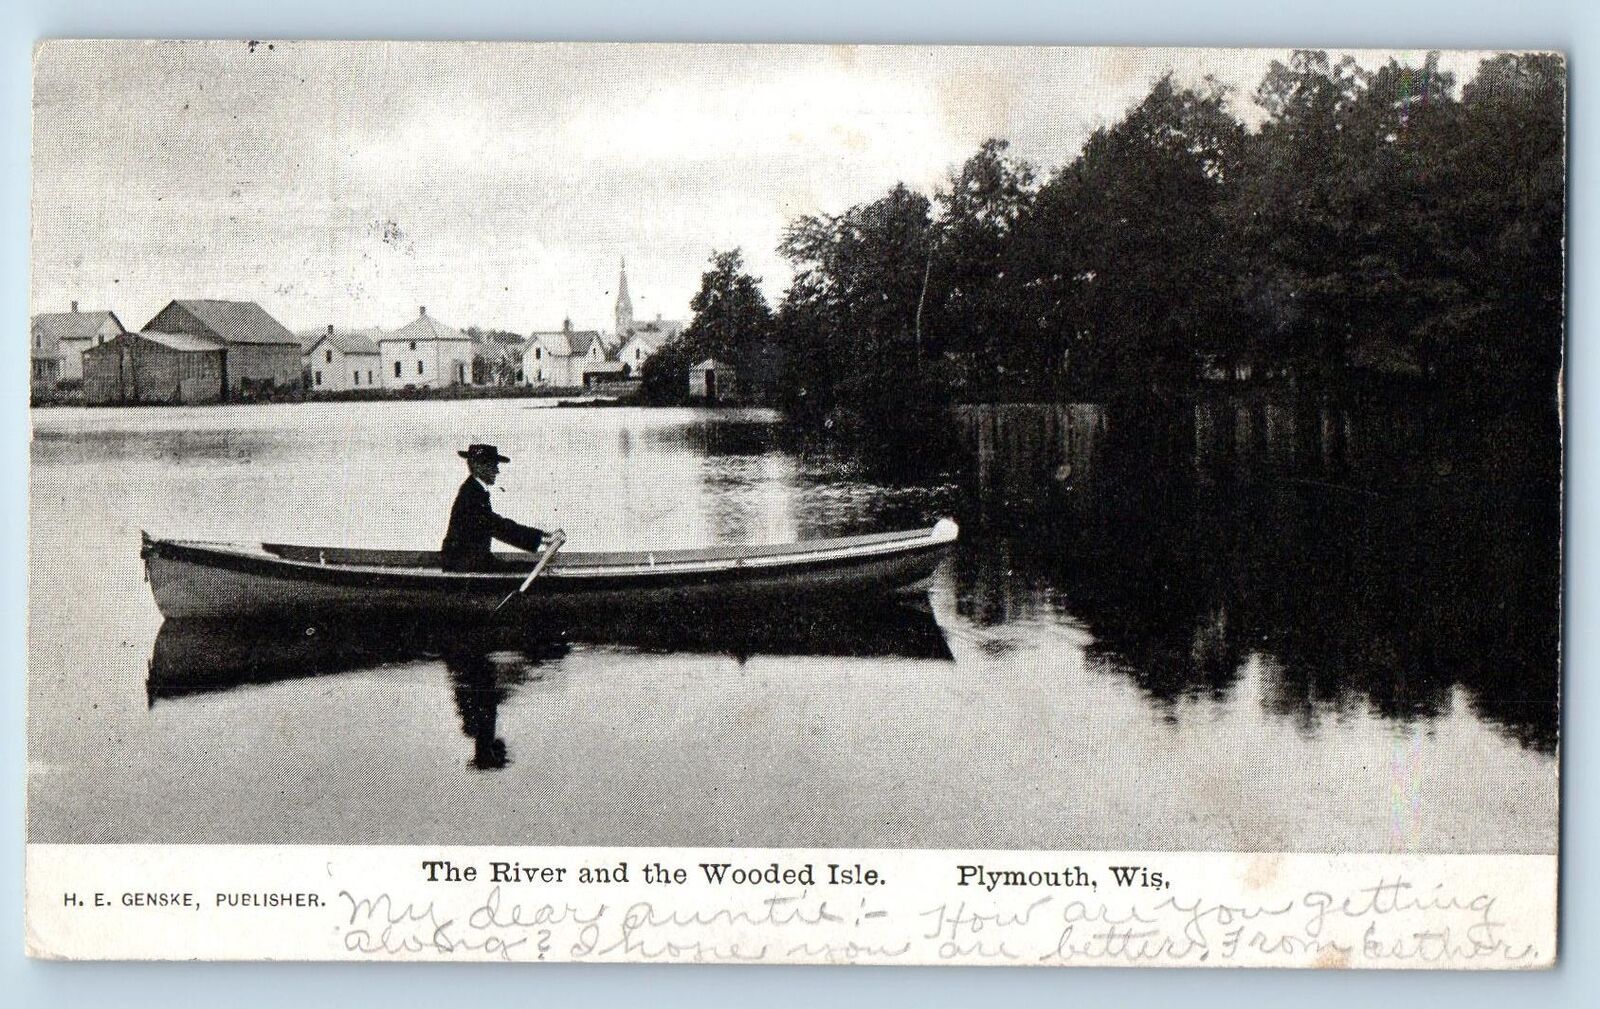 c1905 The River & The Wooded Isle Paddled Boat Grove Plymouth Wisconsin Postcard